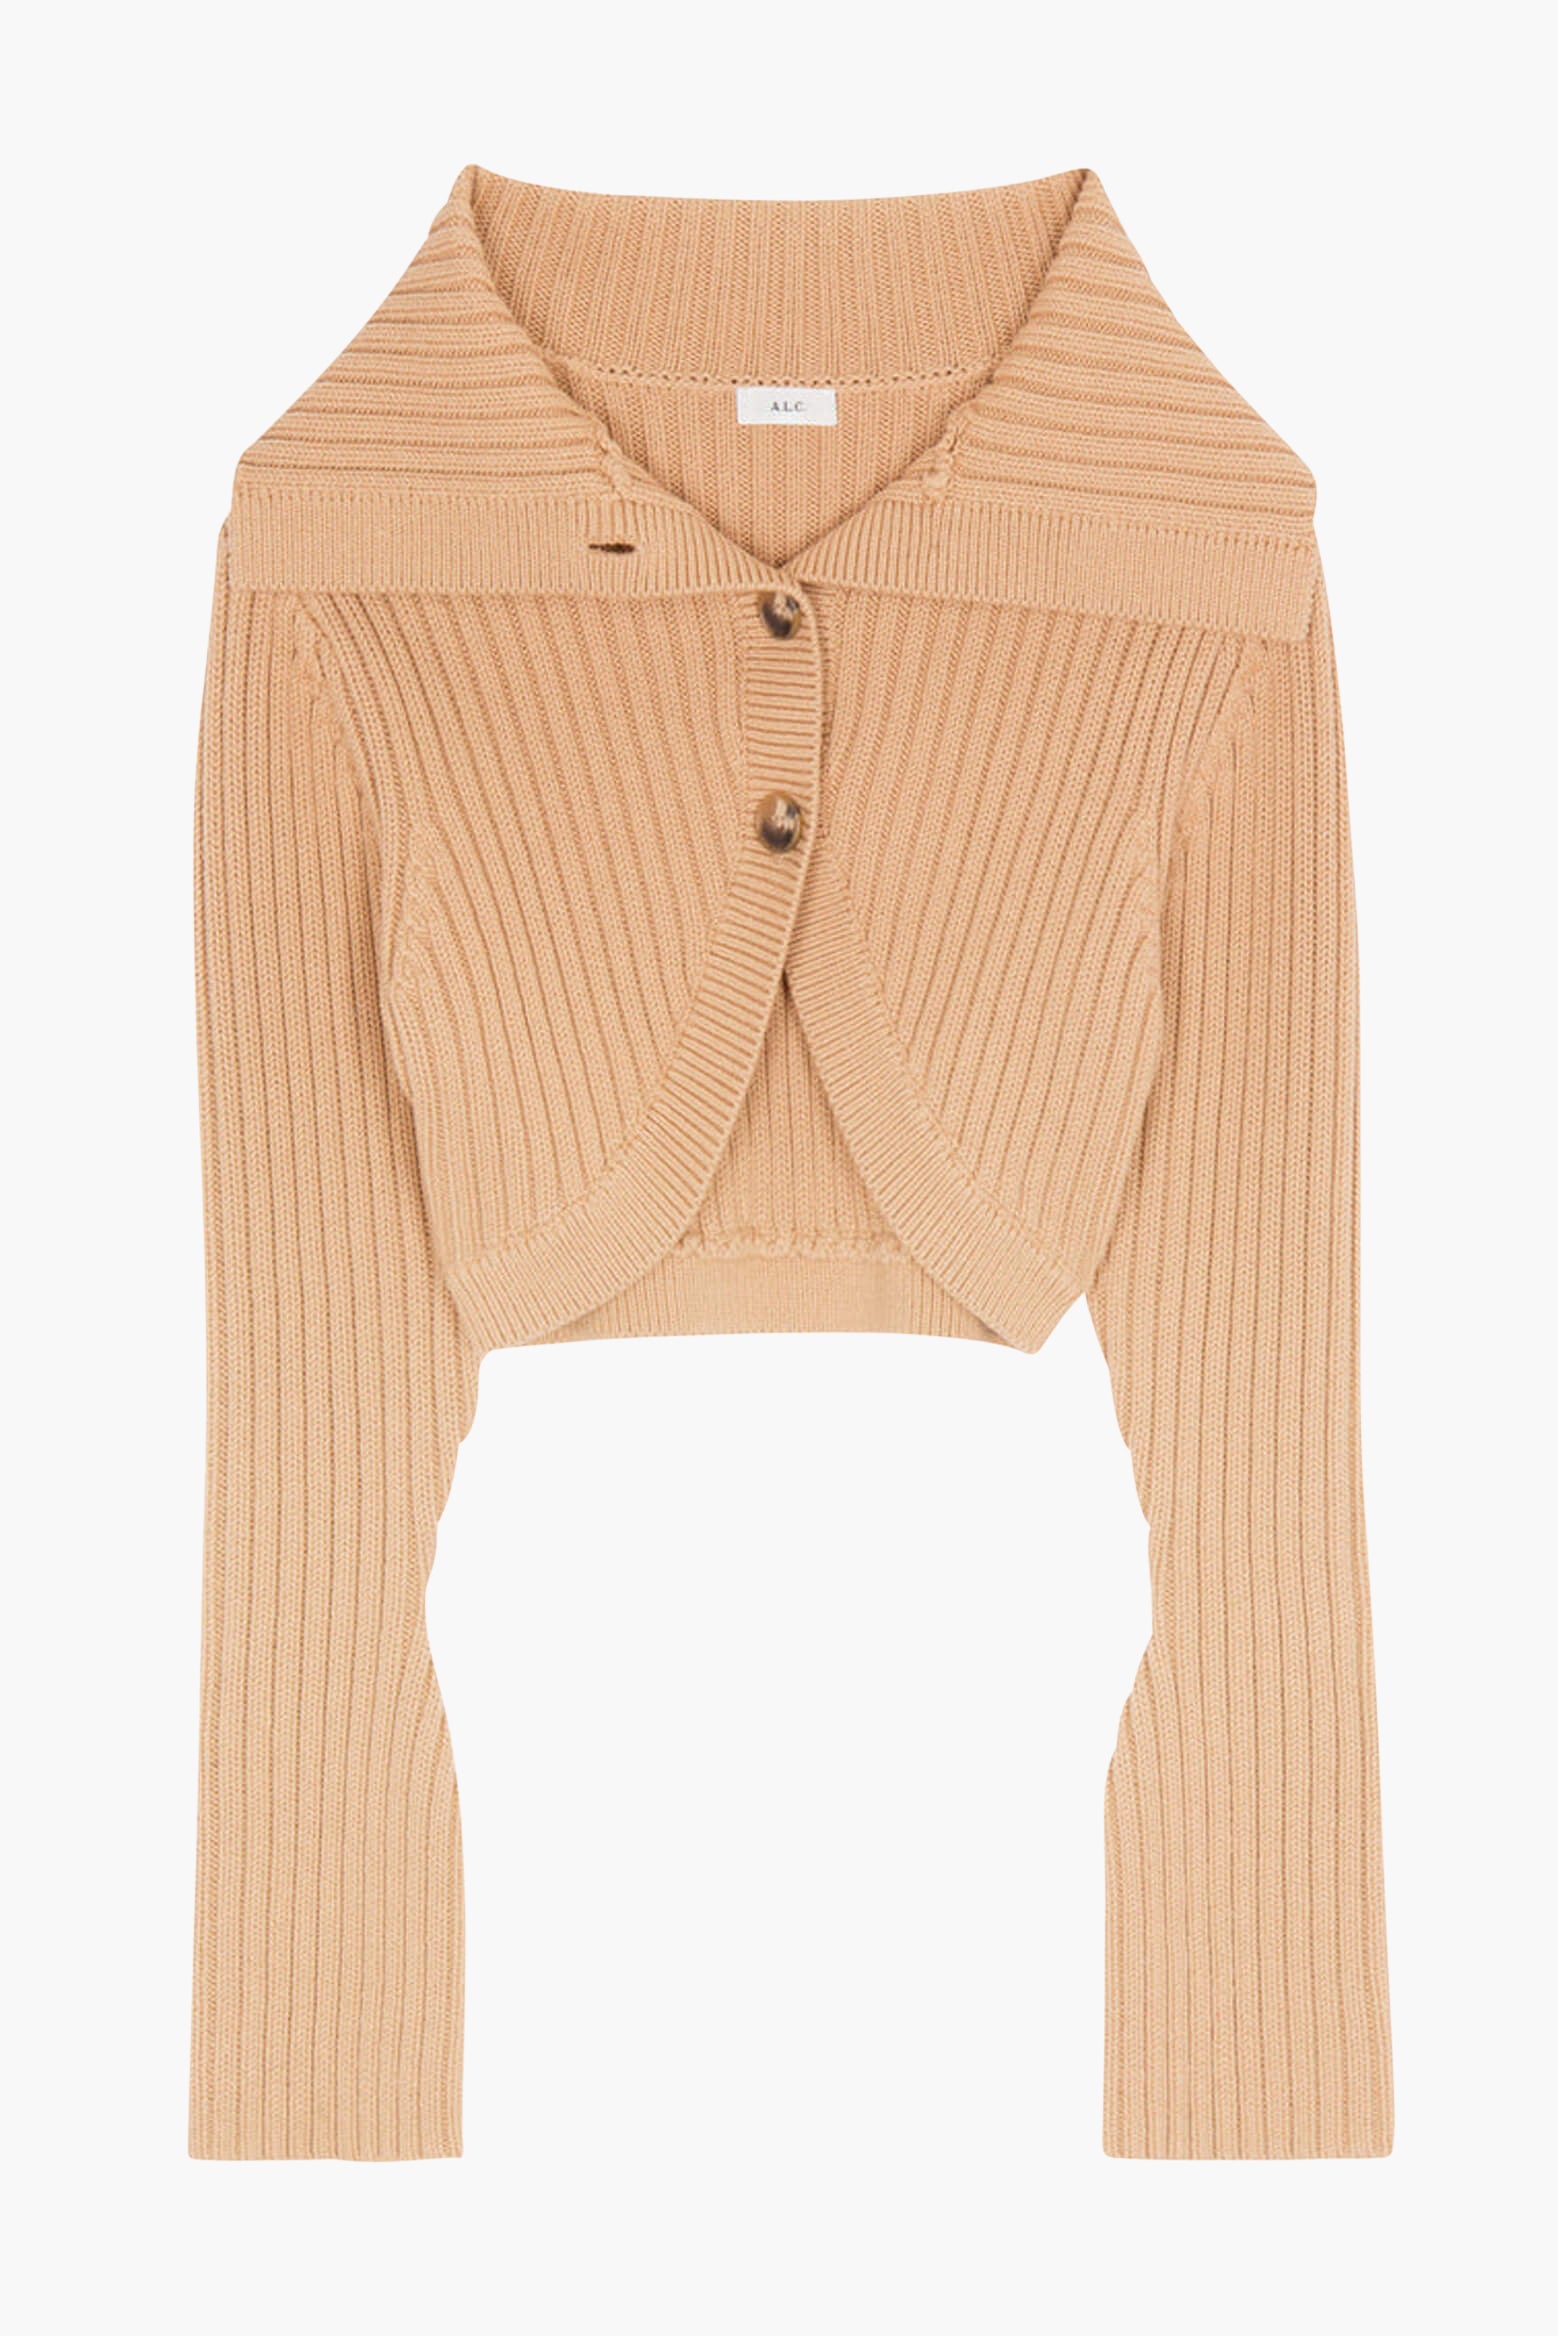 ALC Tinsley Cardigan Butternut available at The New Trend